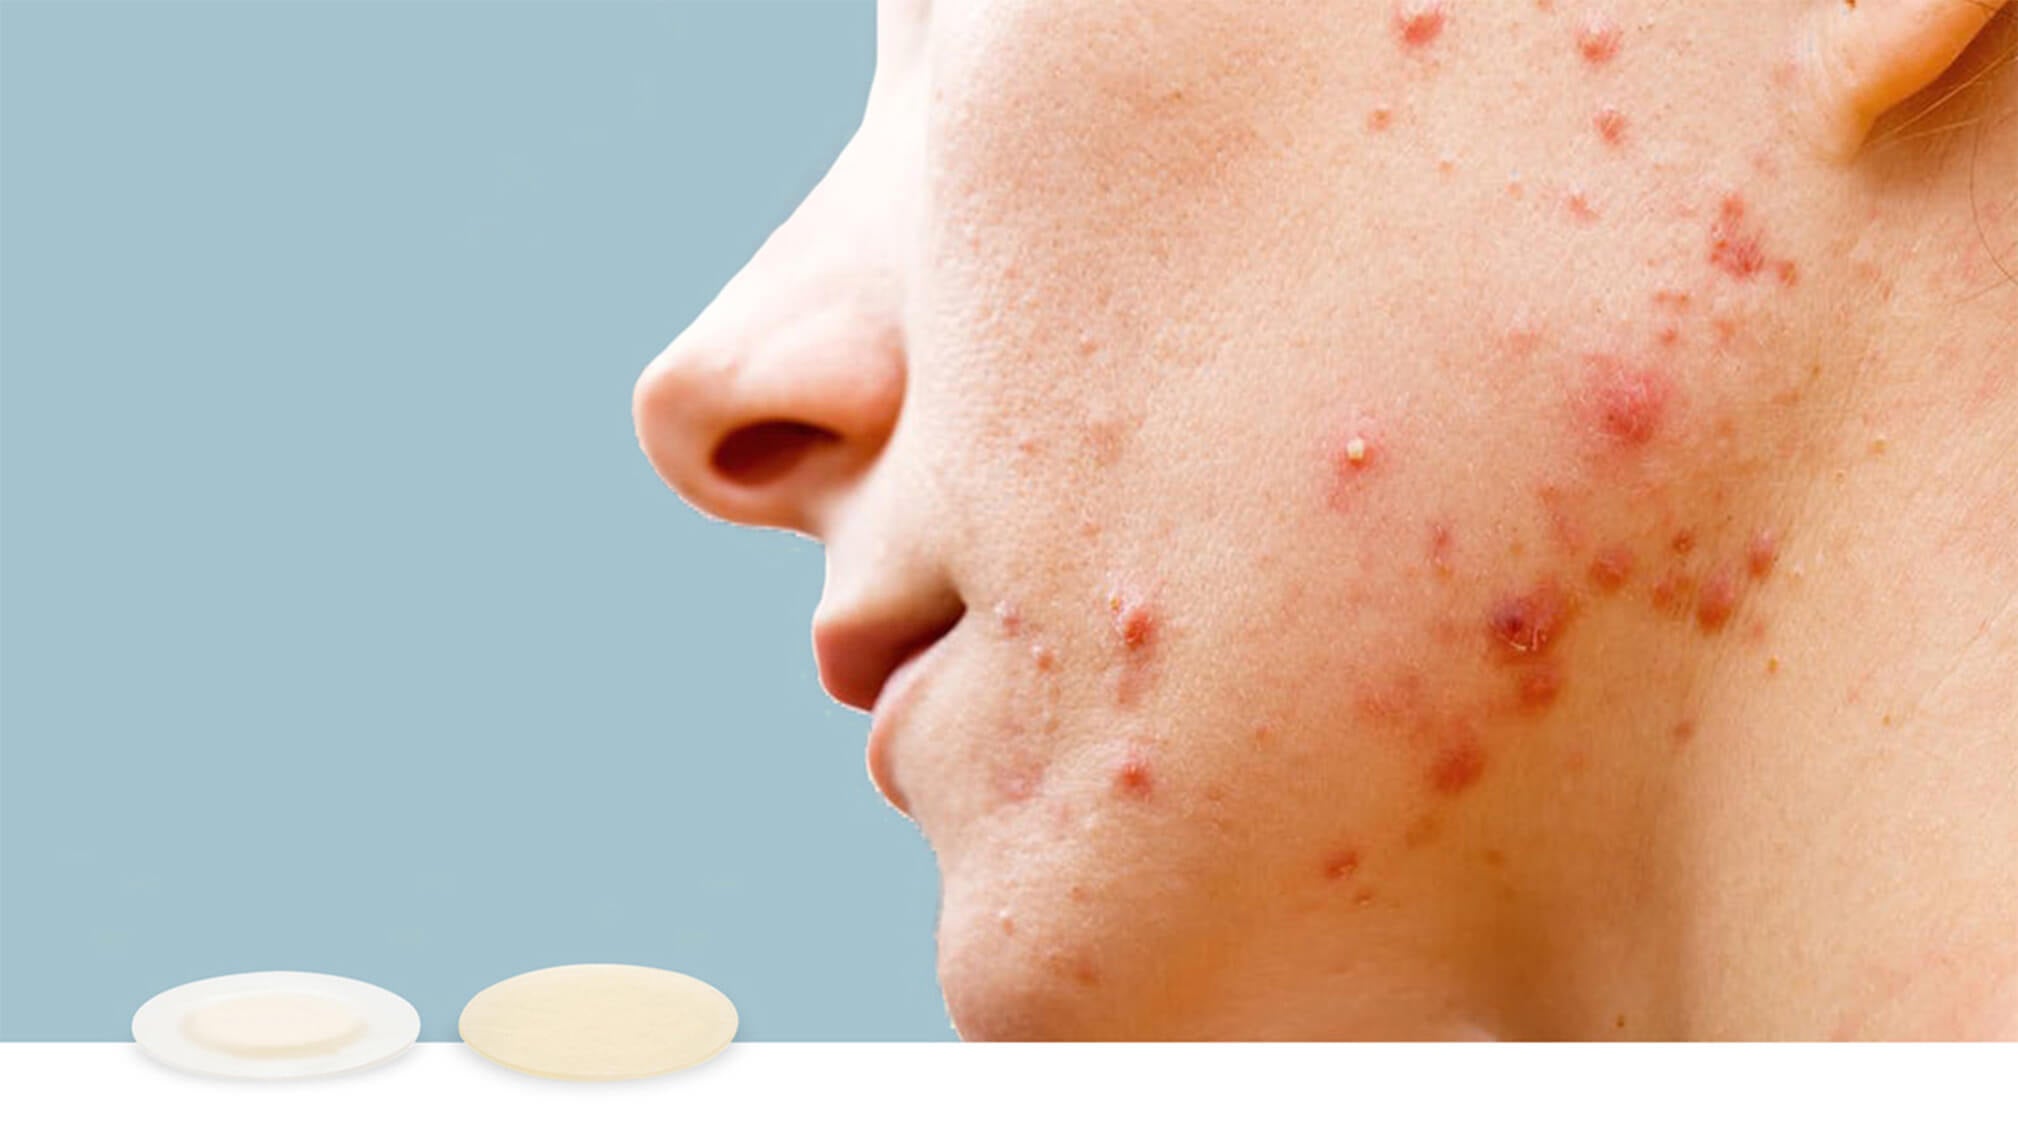 Woman with acne and acne scarring on jaw and cheek